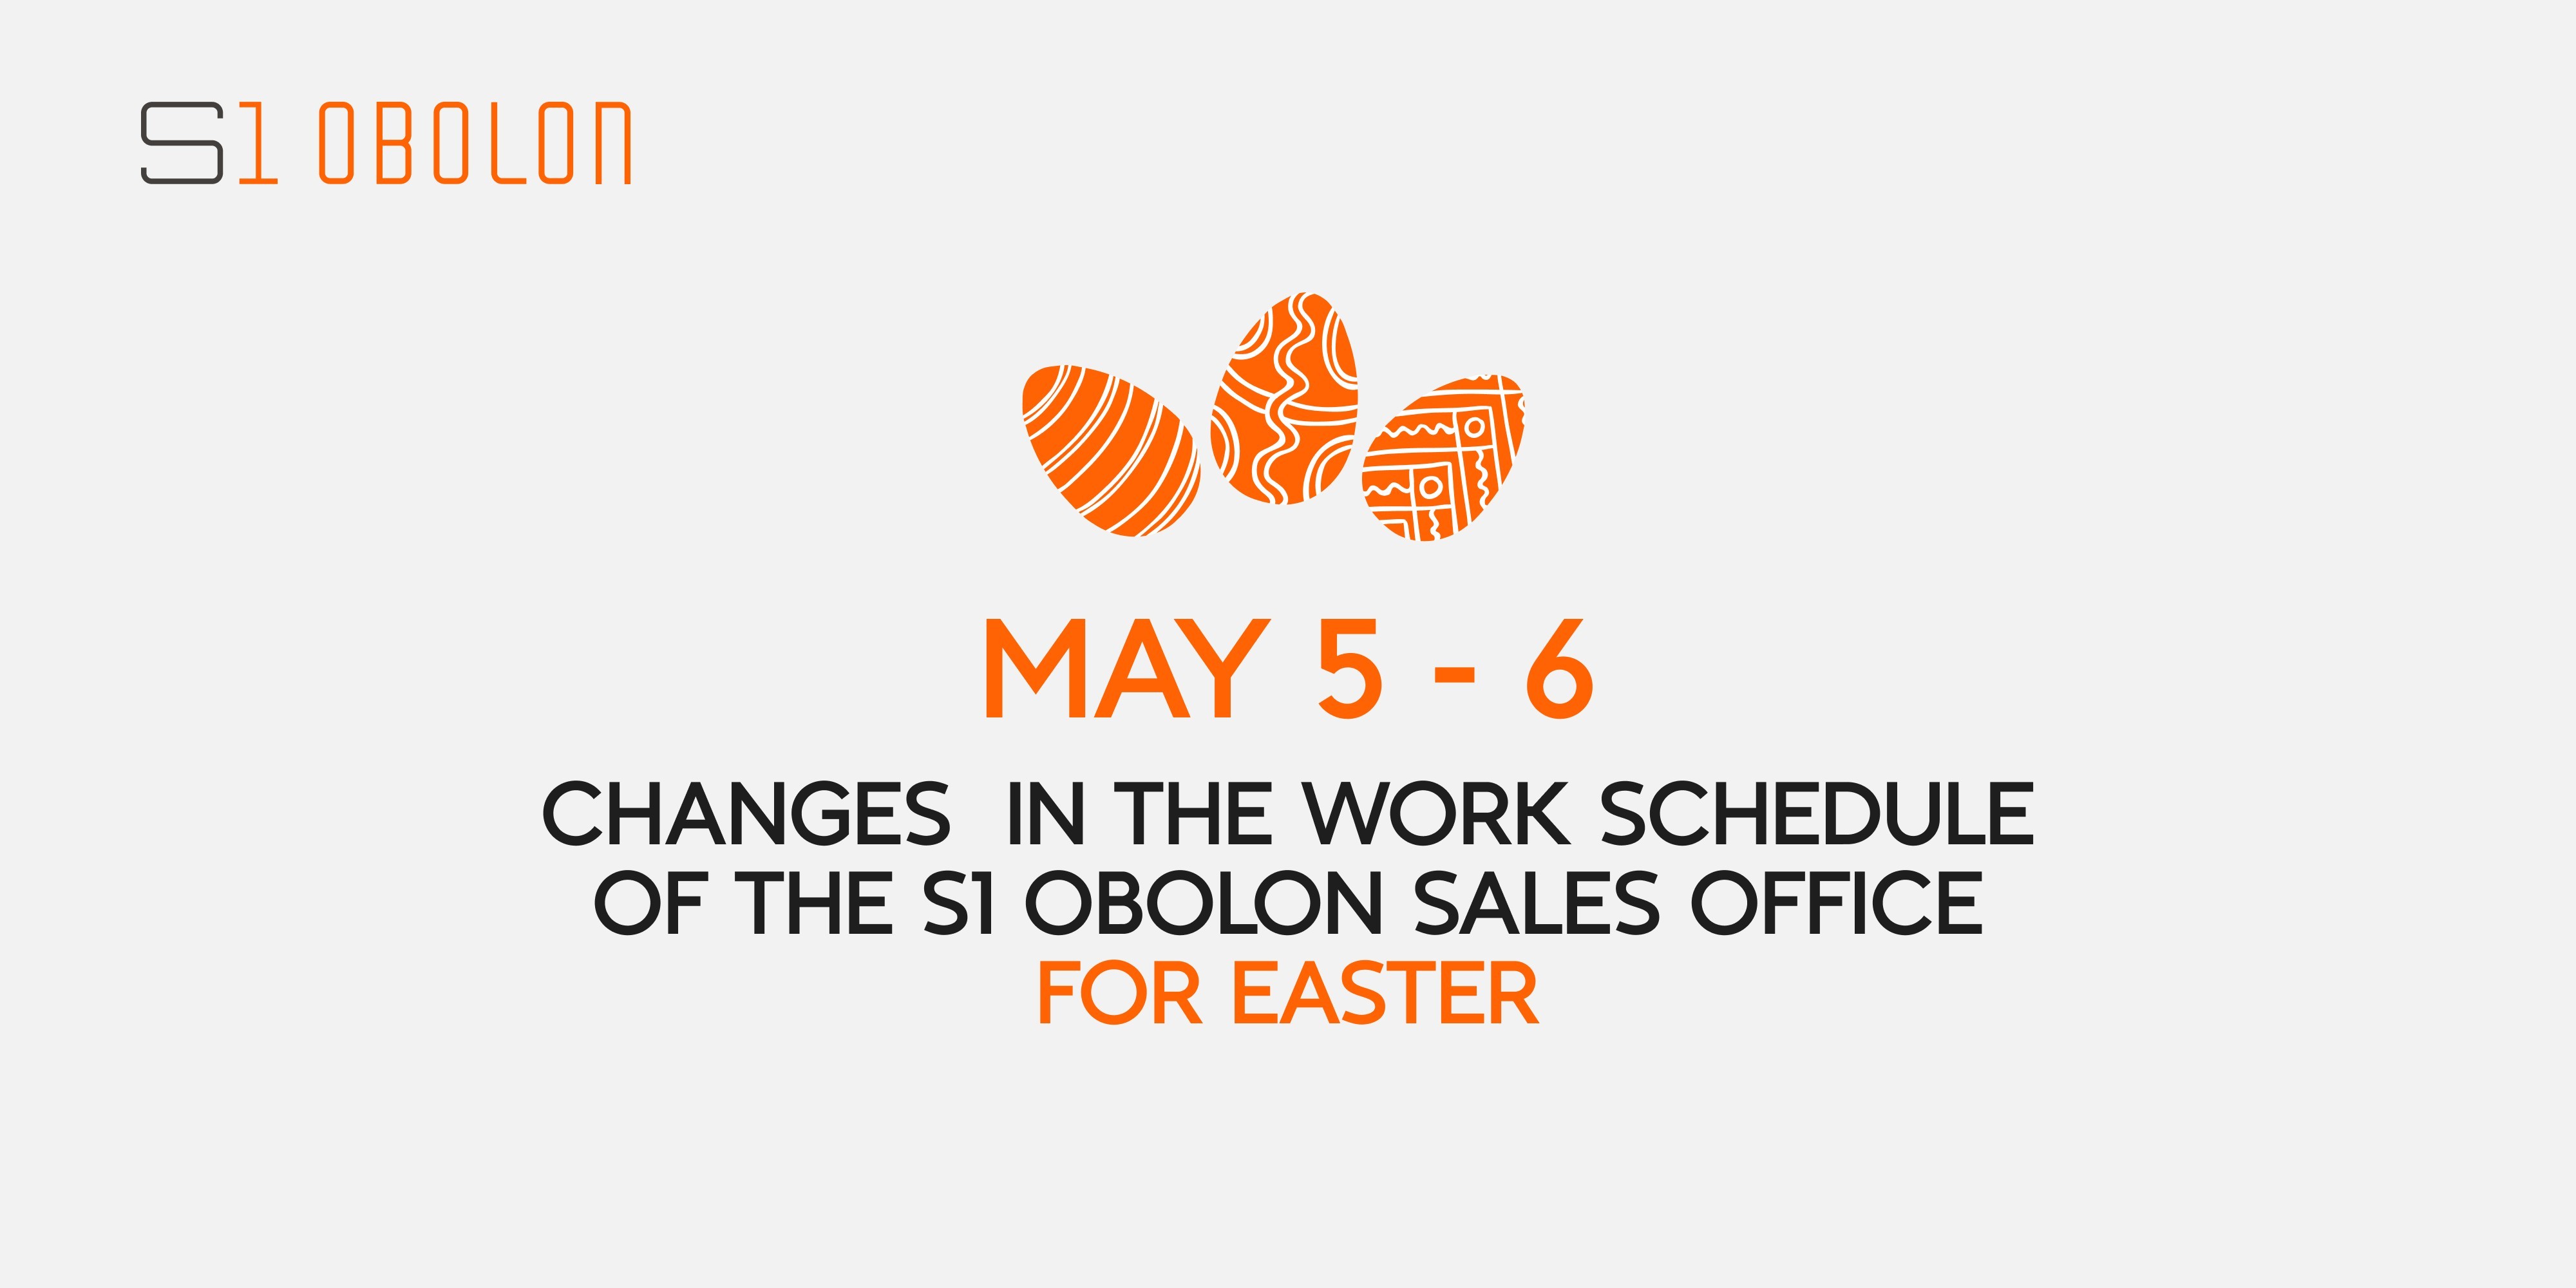 May 5 - 6: changes in the work schedule of the S1 Obolon sales office for Easter